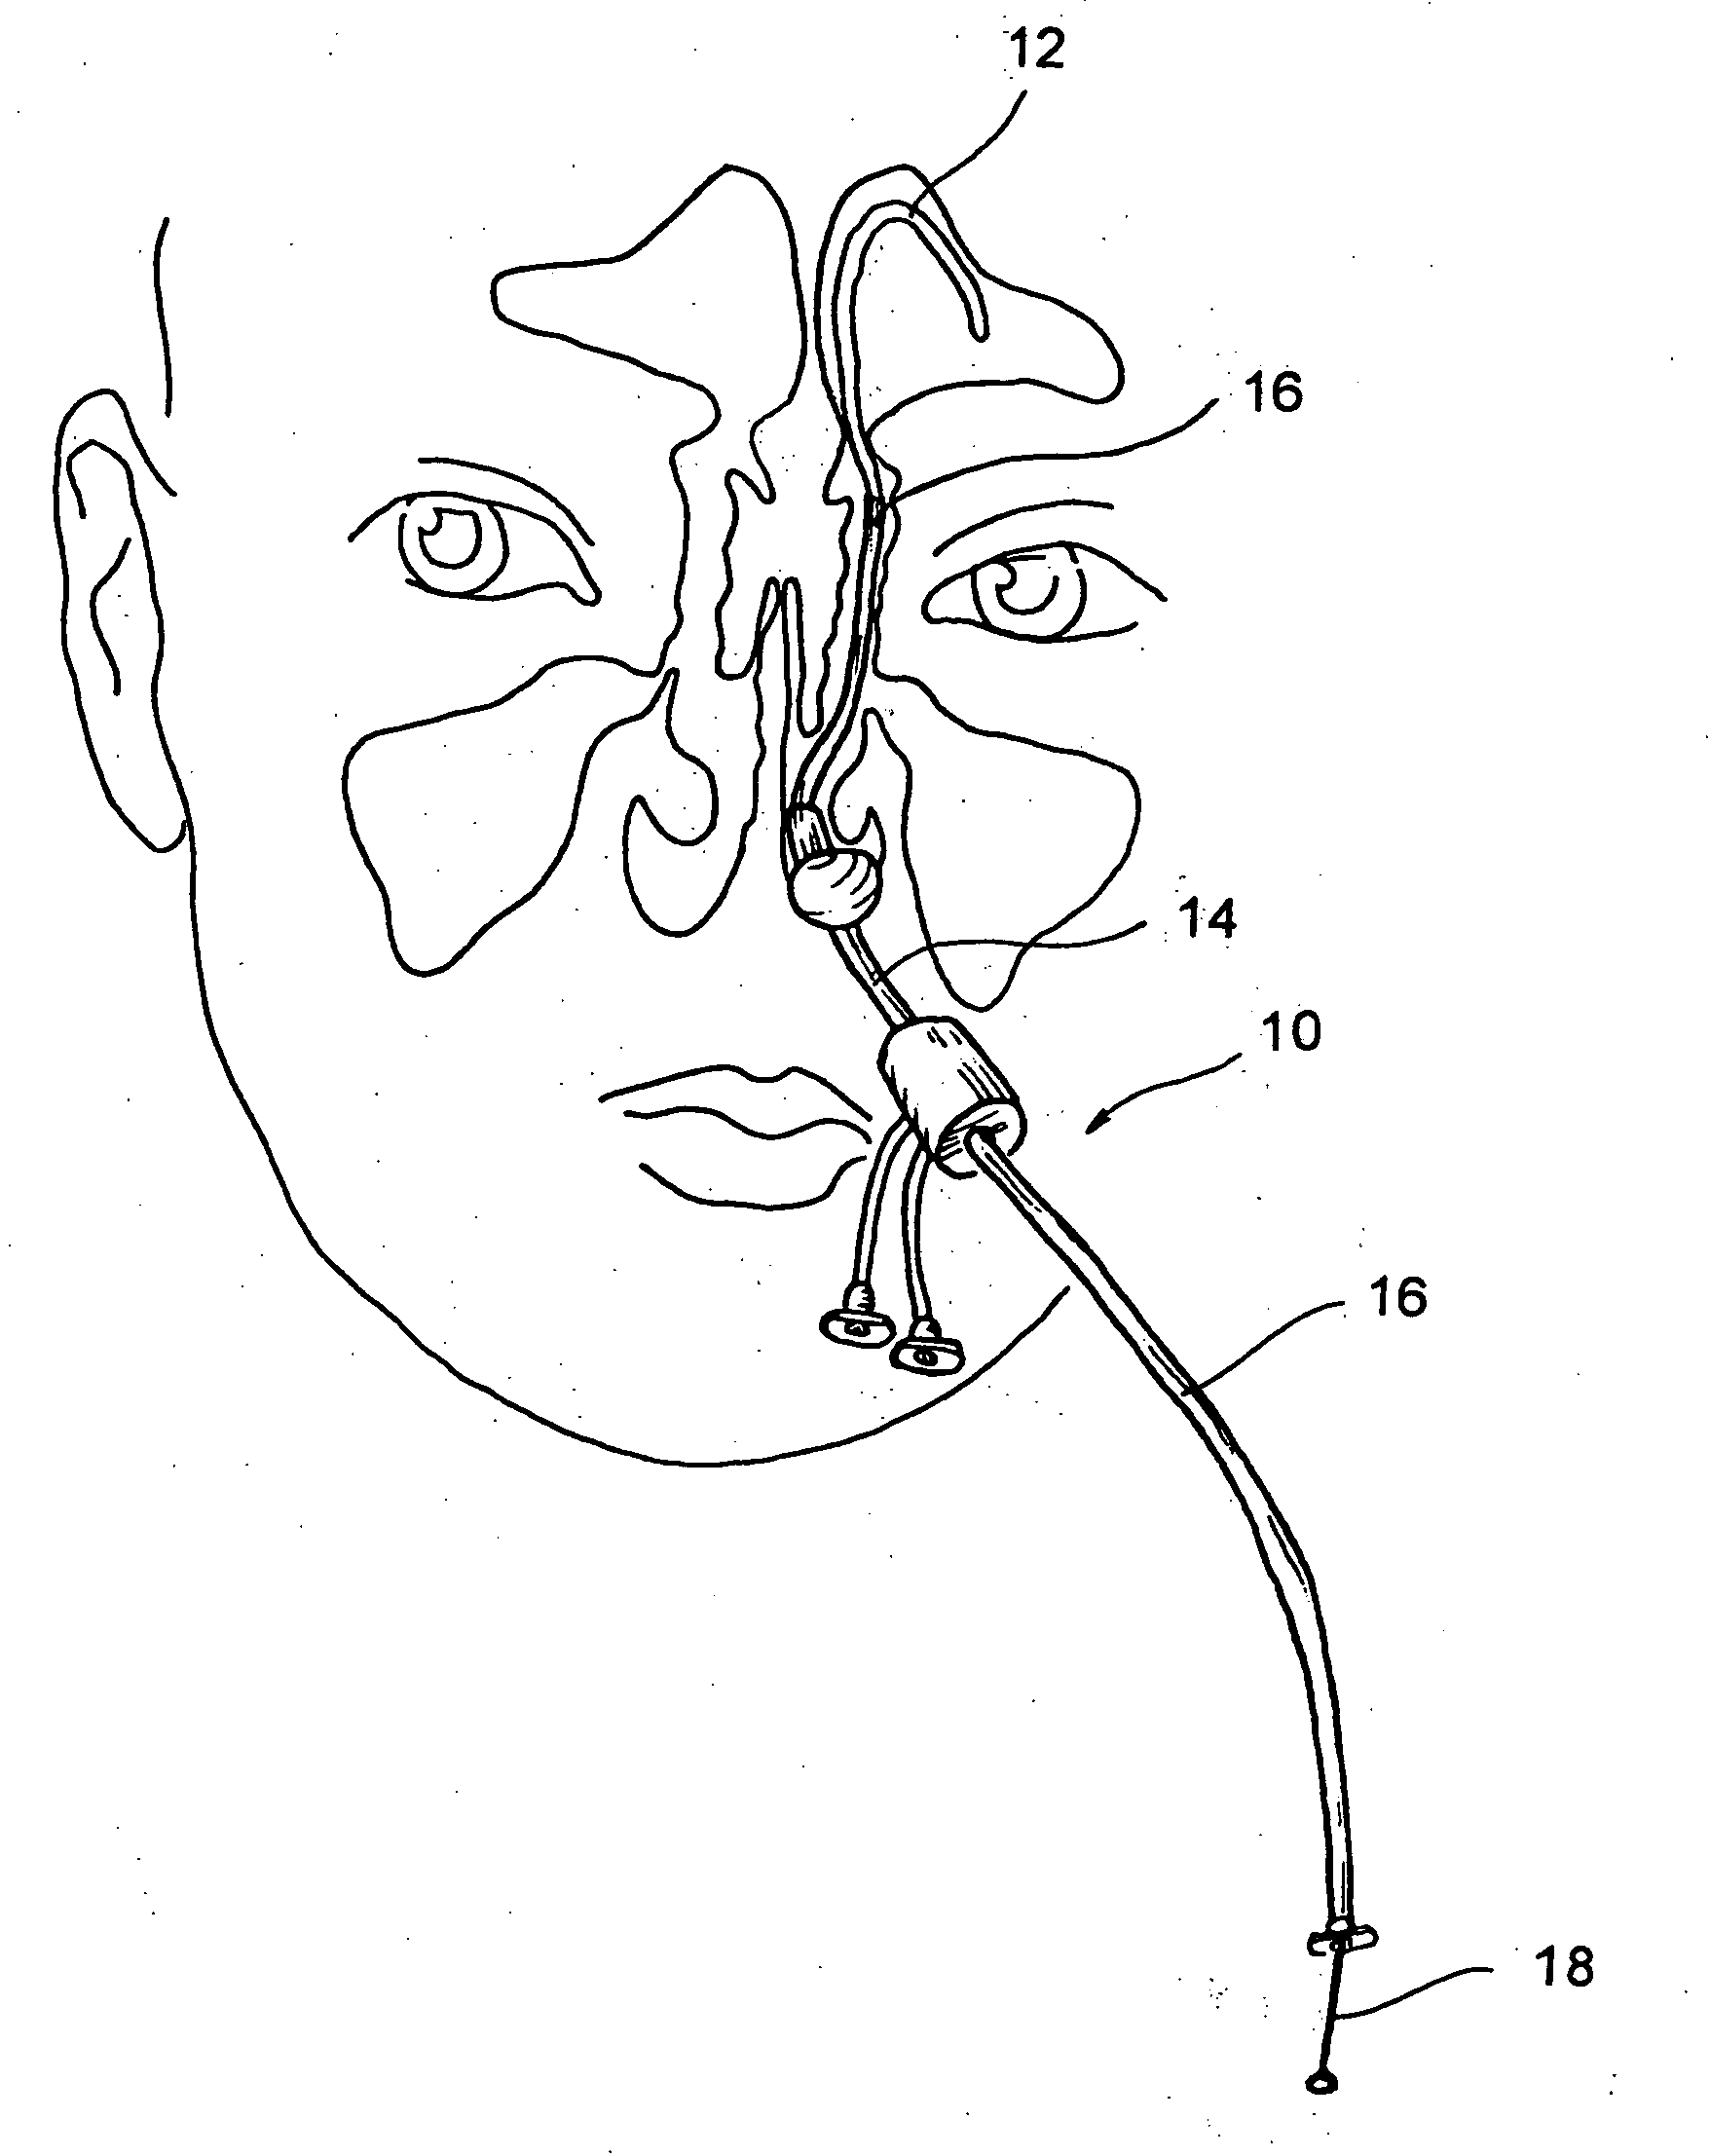 Implantable device and methods for delivering drugs and other substances to treat sinusitis and other disorders